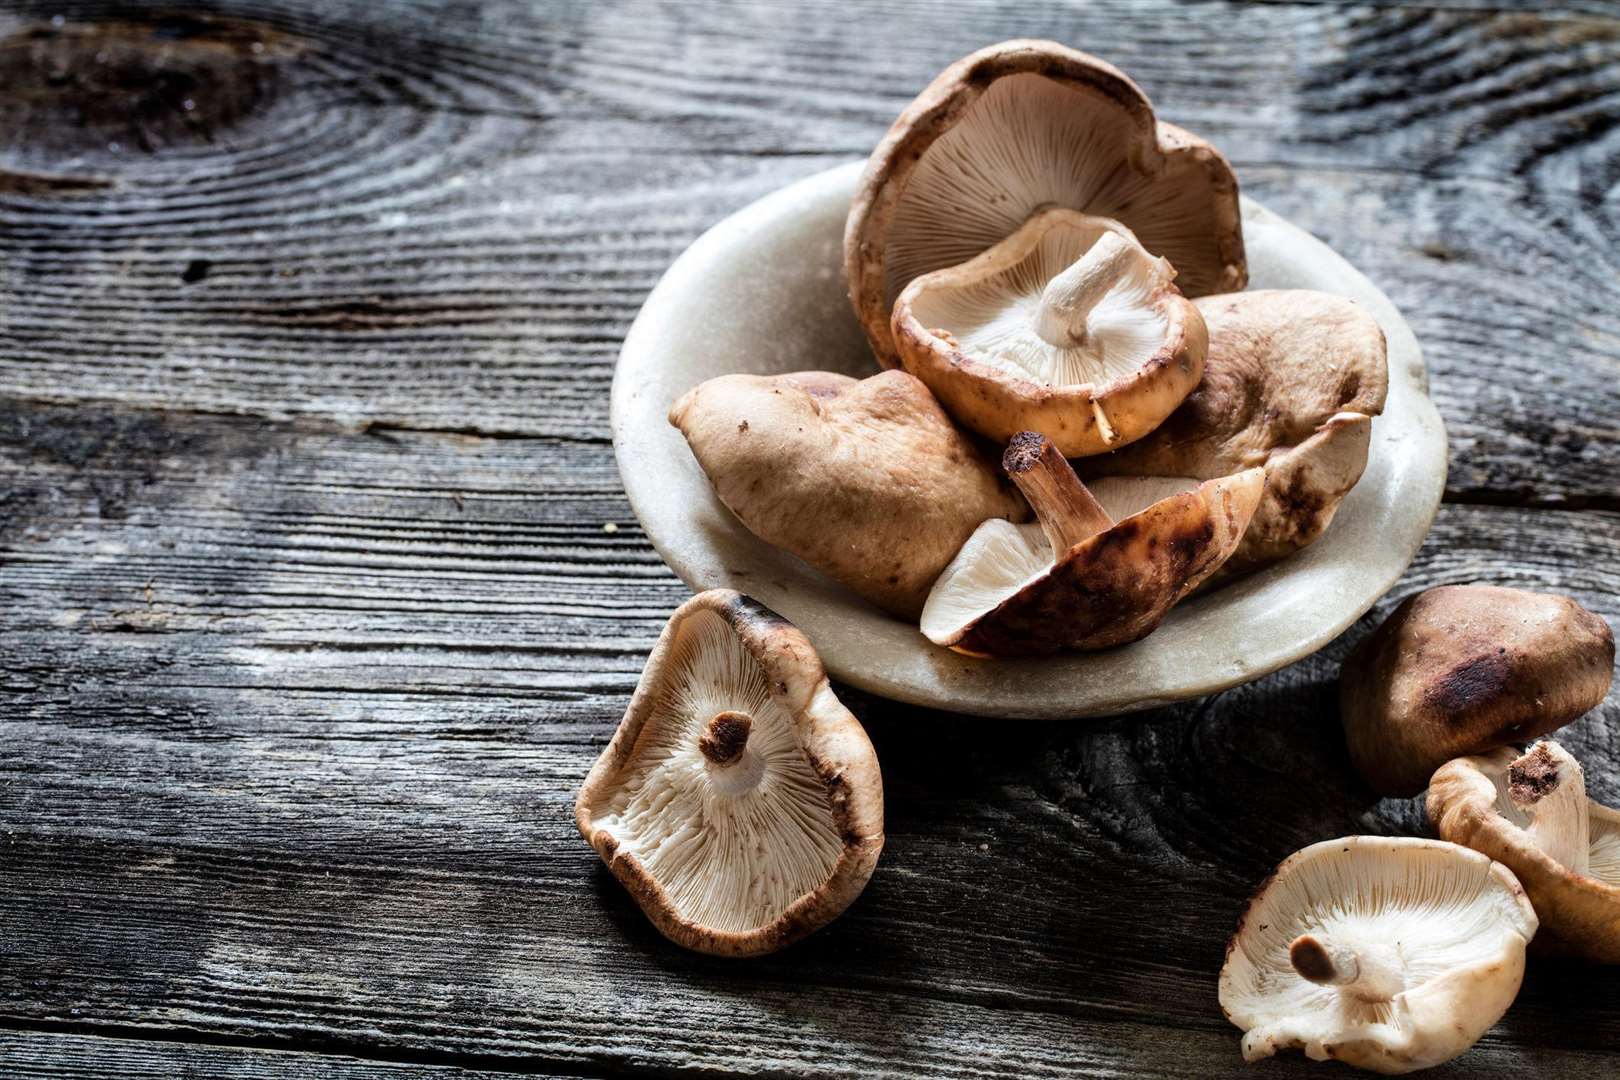 Vitamin D is a big beauty nutrient, and shiitake mushrooms are packed with it